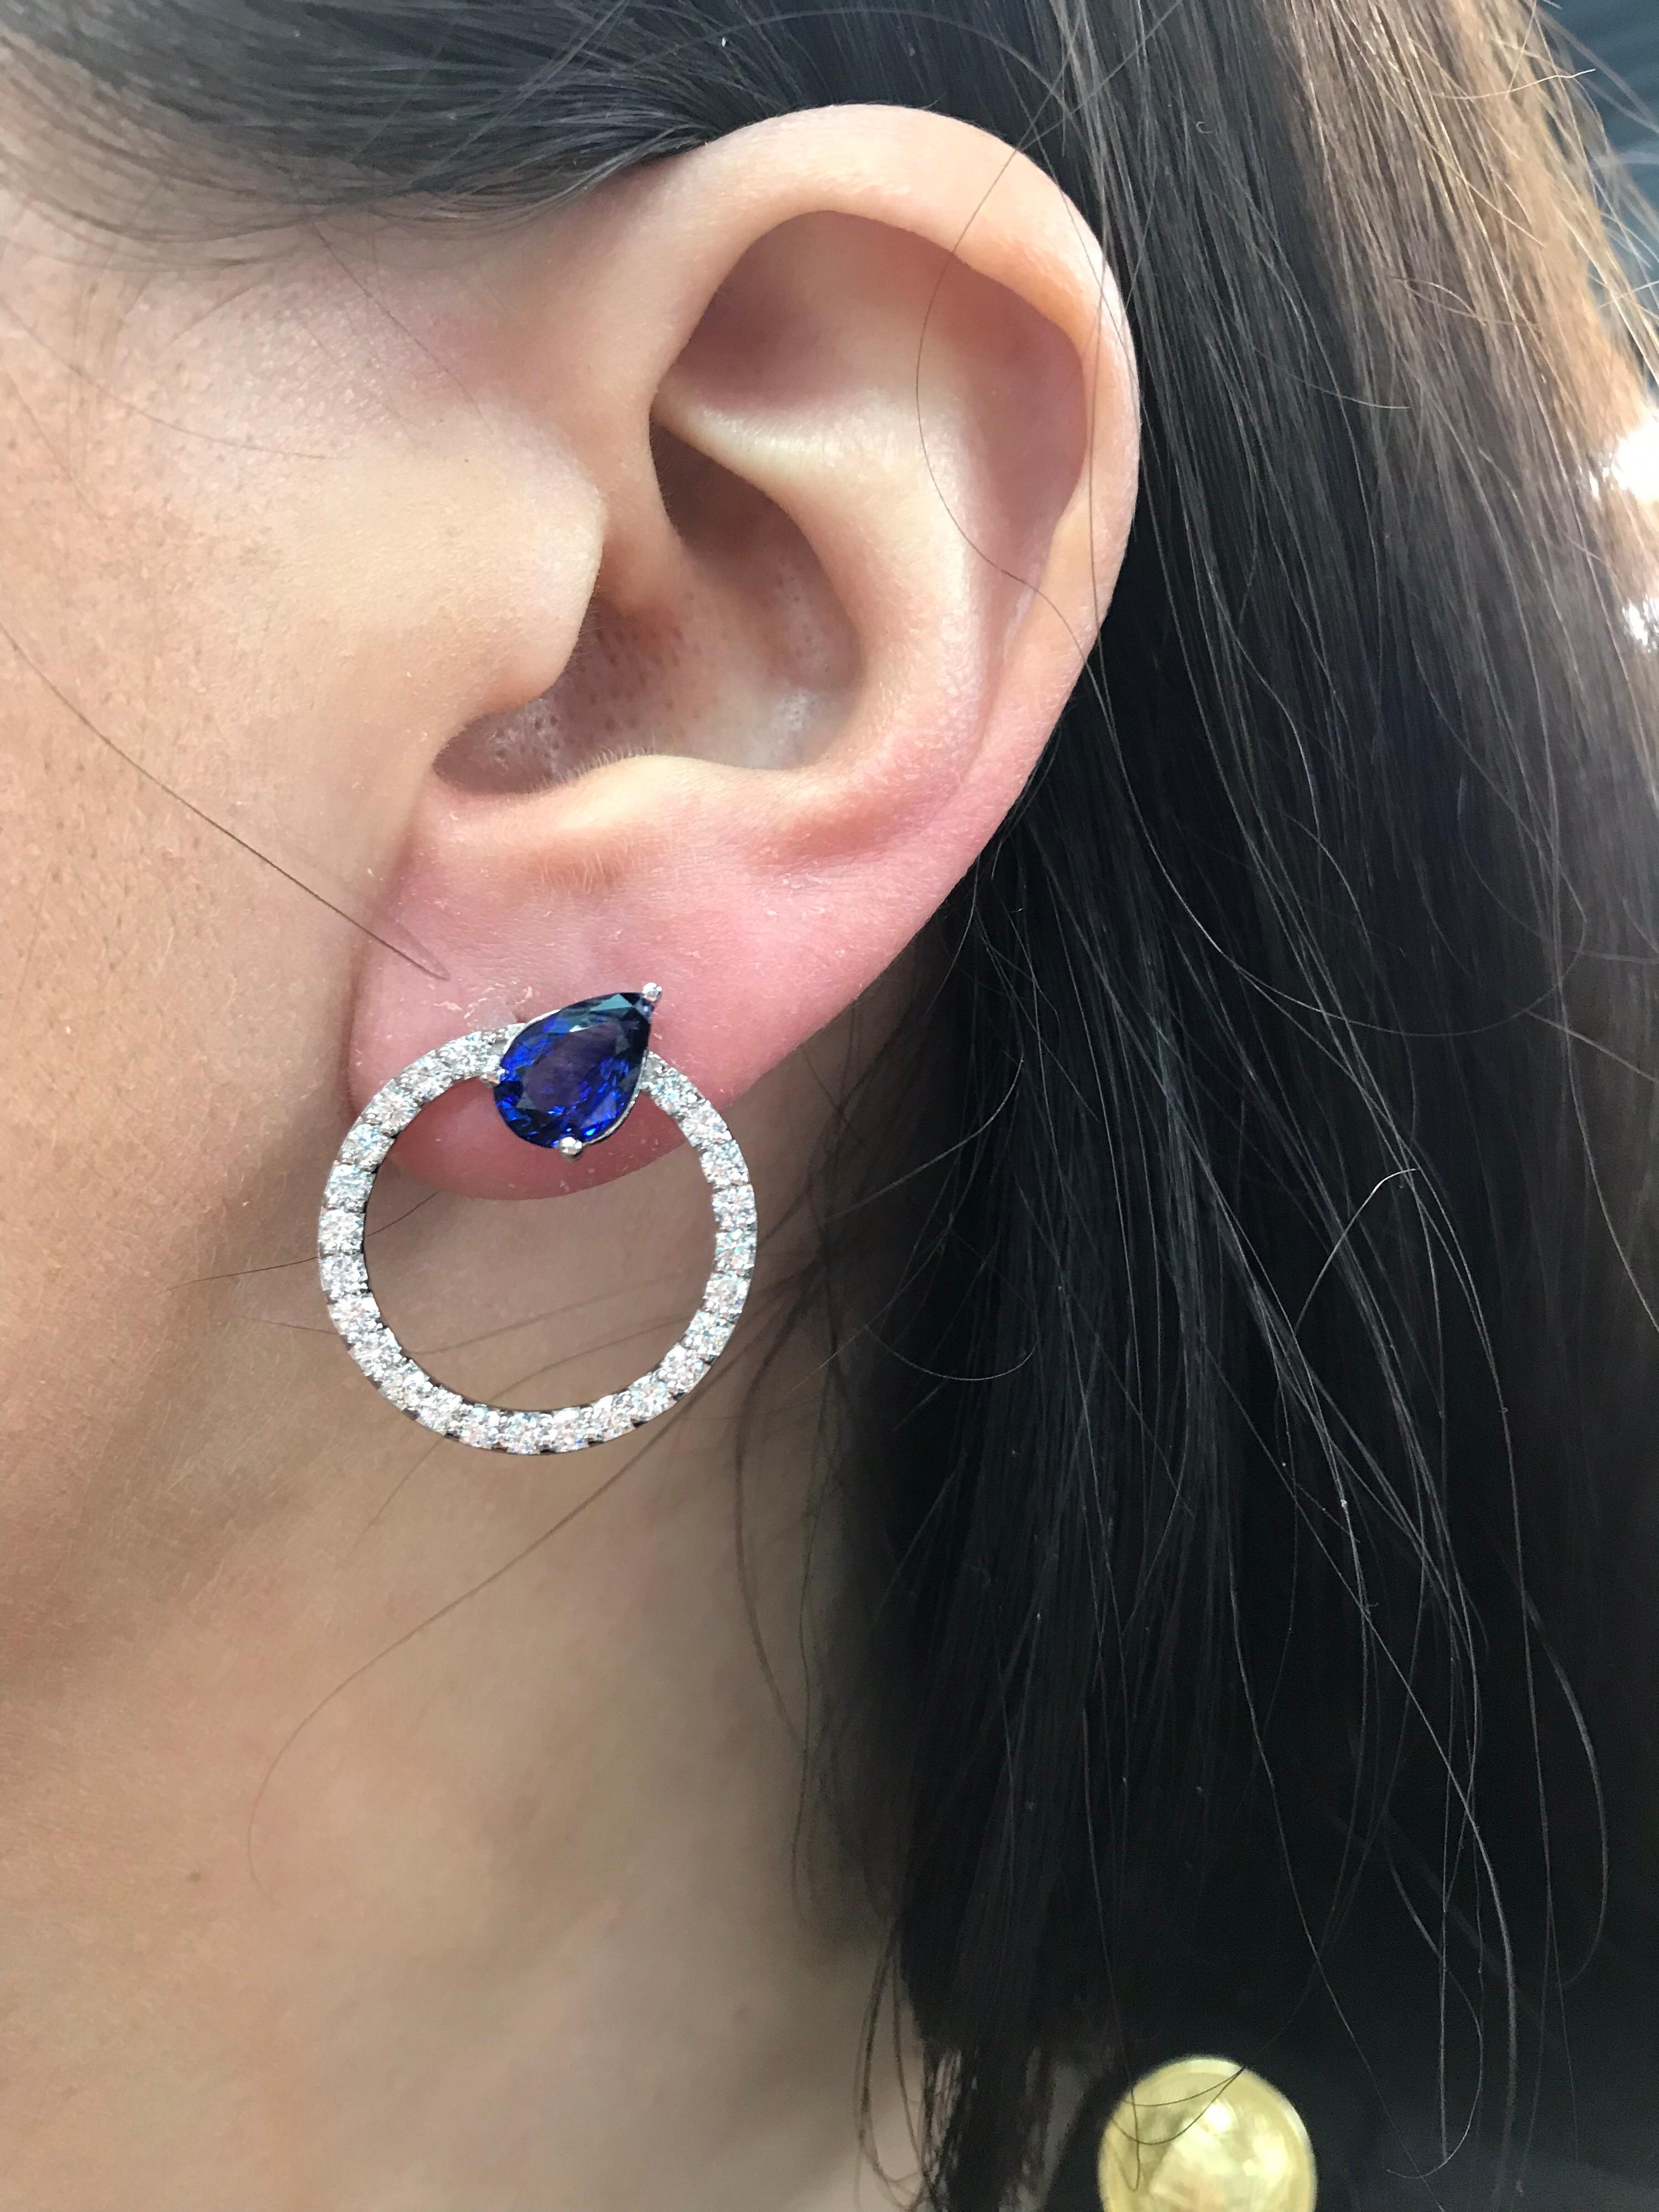 14K White gold hoop earrings featuring two pear shape Sapphires weighing 3.41 carats flanked with round brilliants weighing 1.50 carats.
